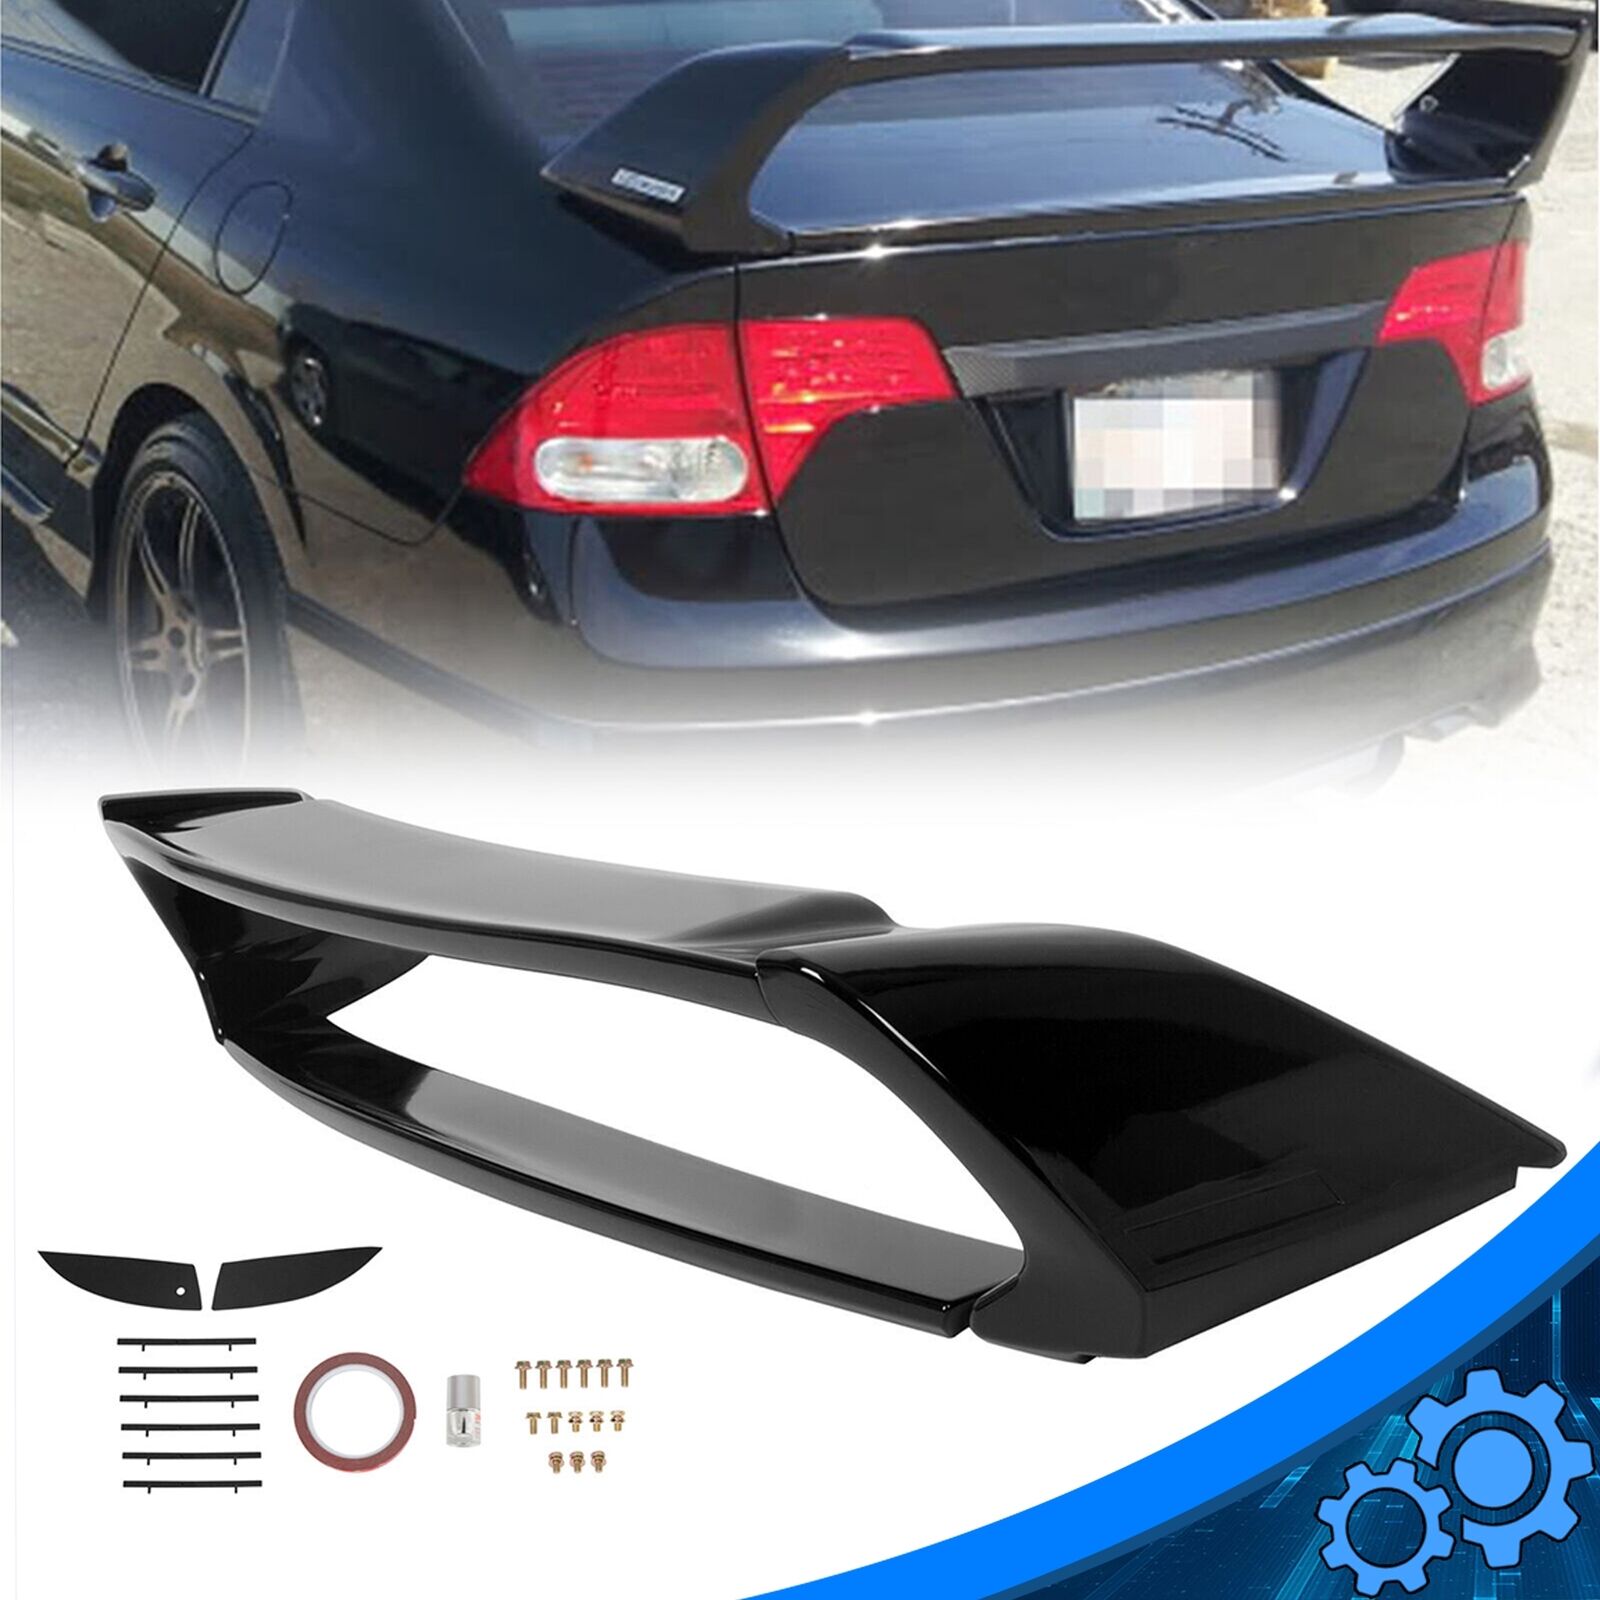 Gloss Blk Painted Rear Trunk Spoiler Wing JDM MUGEN Style For 06-11 Honda Civic